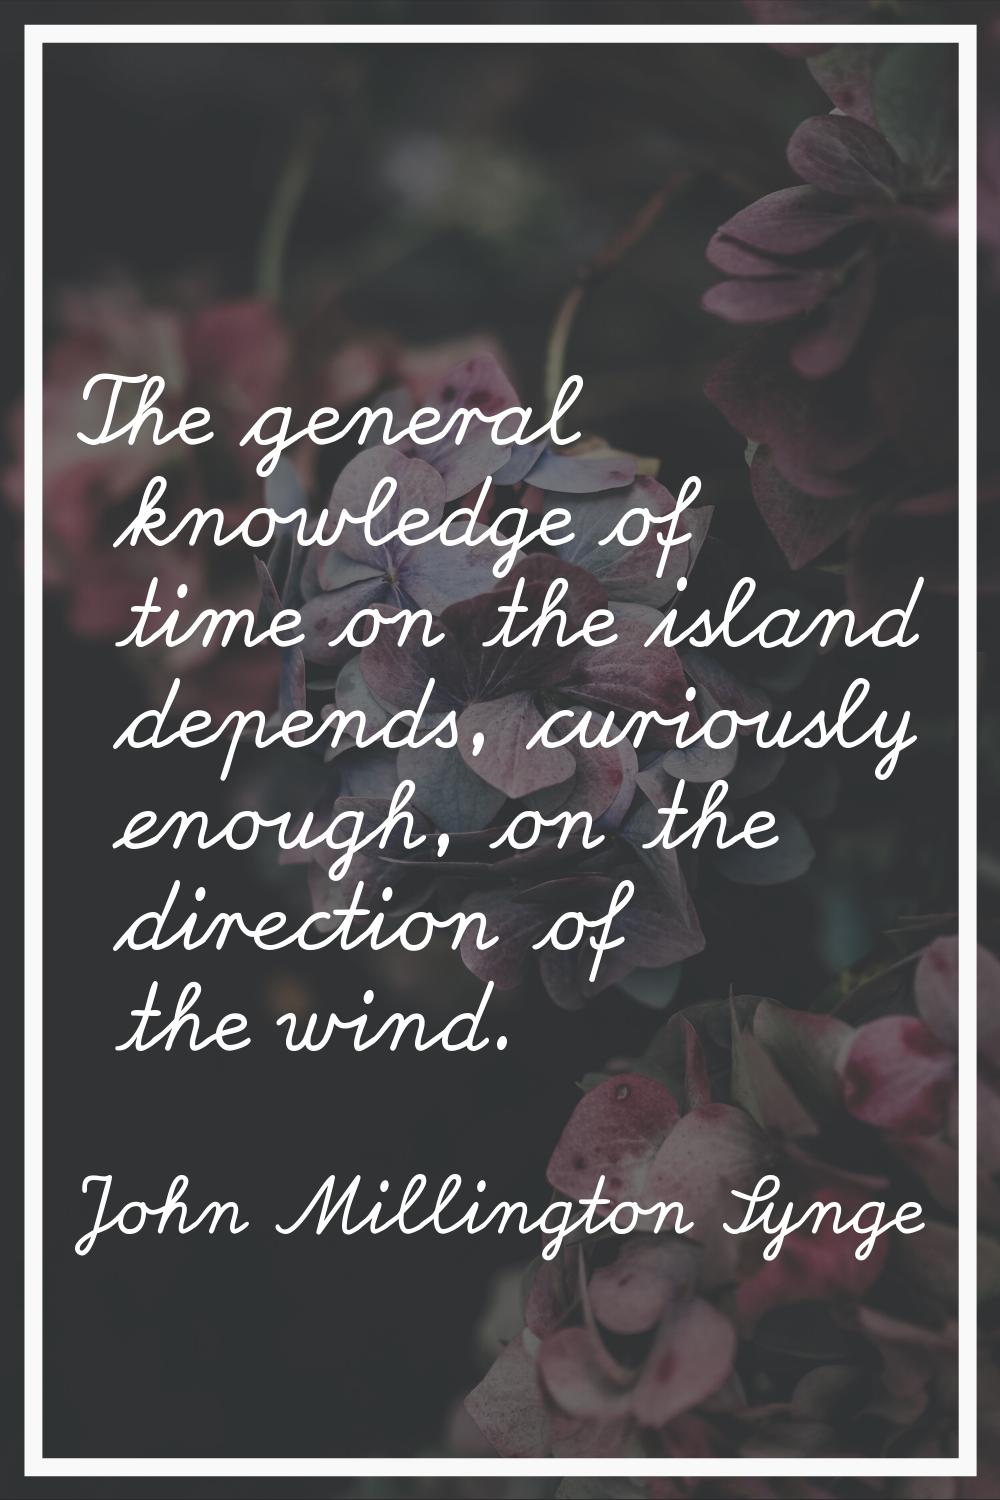 The general knowledge of time on the island depends, curiously enough, on the direction of the wind